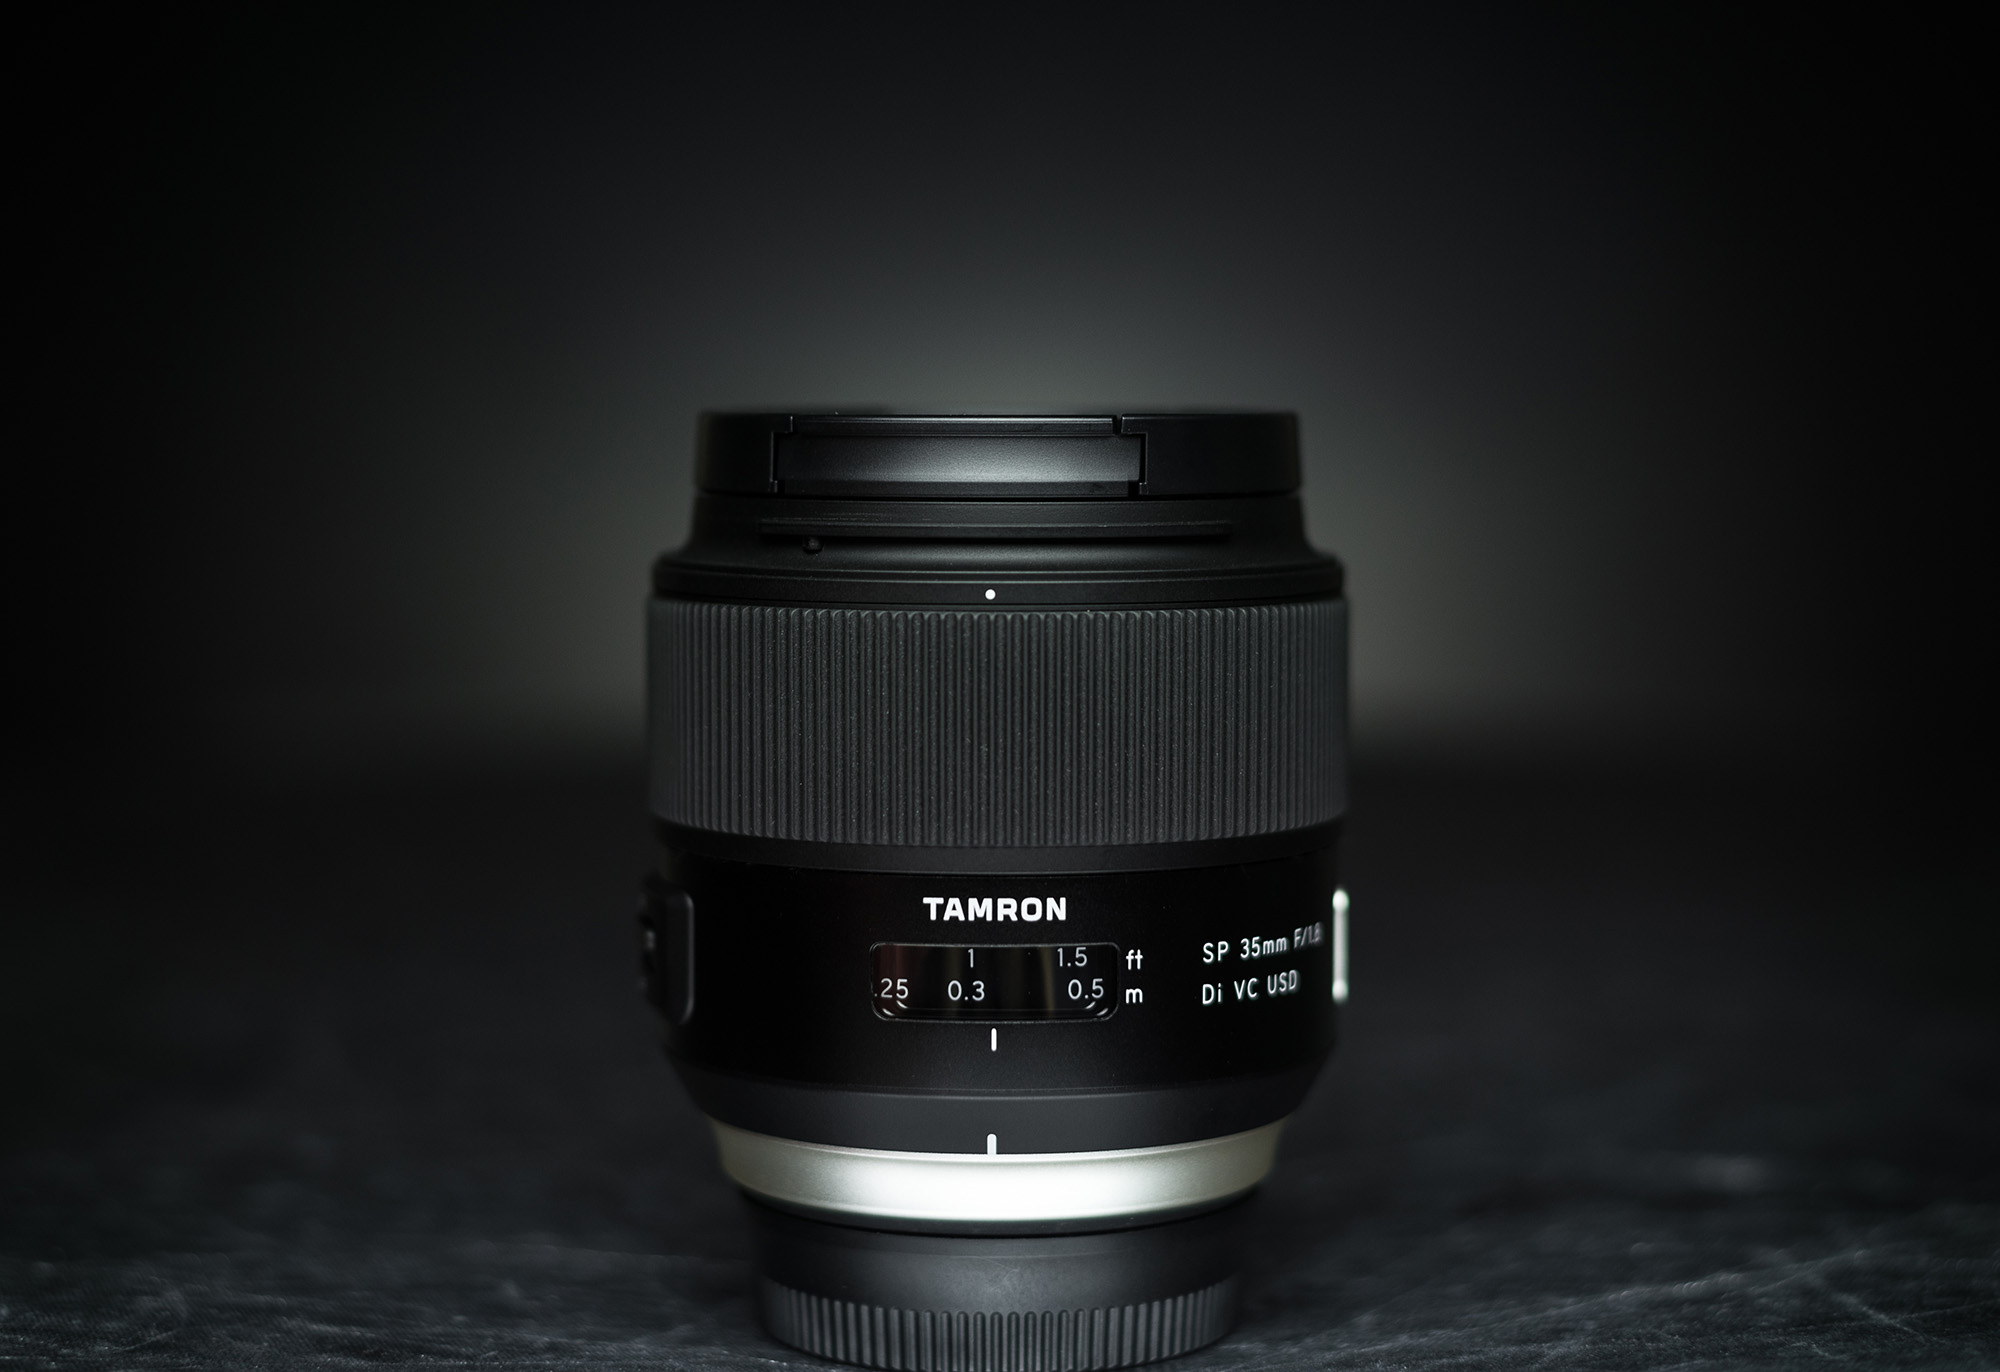 Tamron 35mm f/1.8 Di VC Review: Beast Mode On A Budget